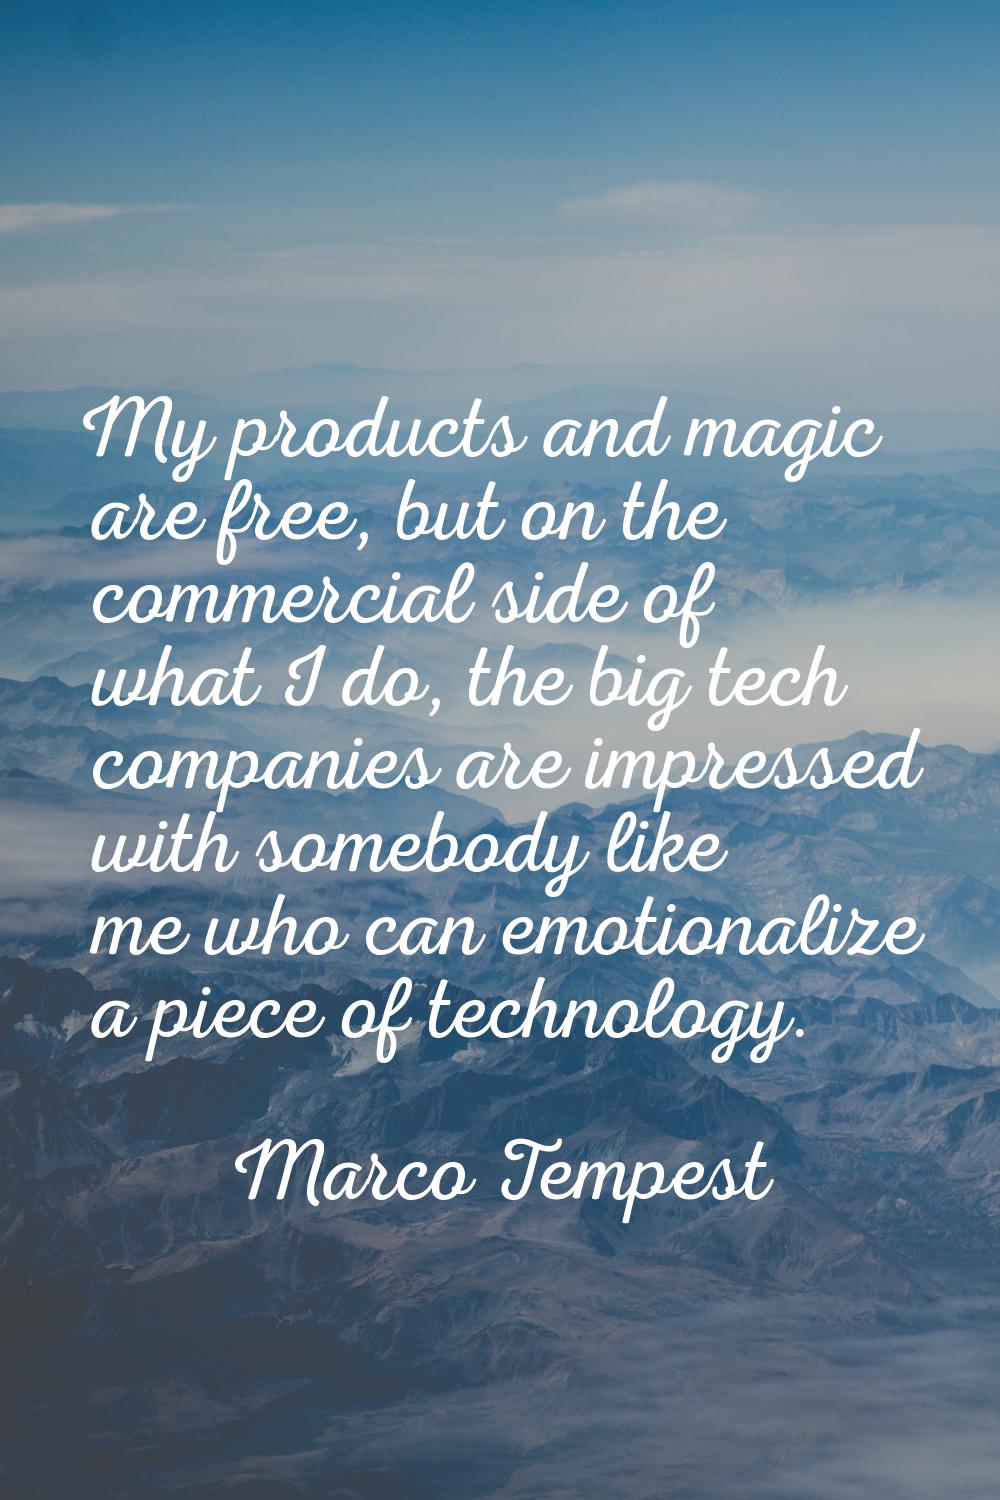 My products and magic are free, but on the commercial side of what I do, the big tech companies are